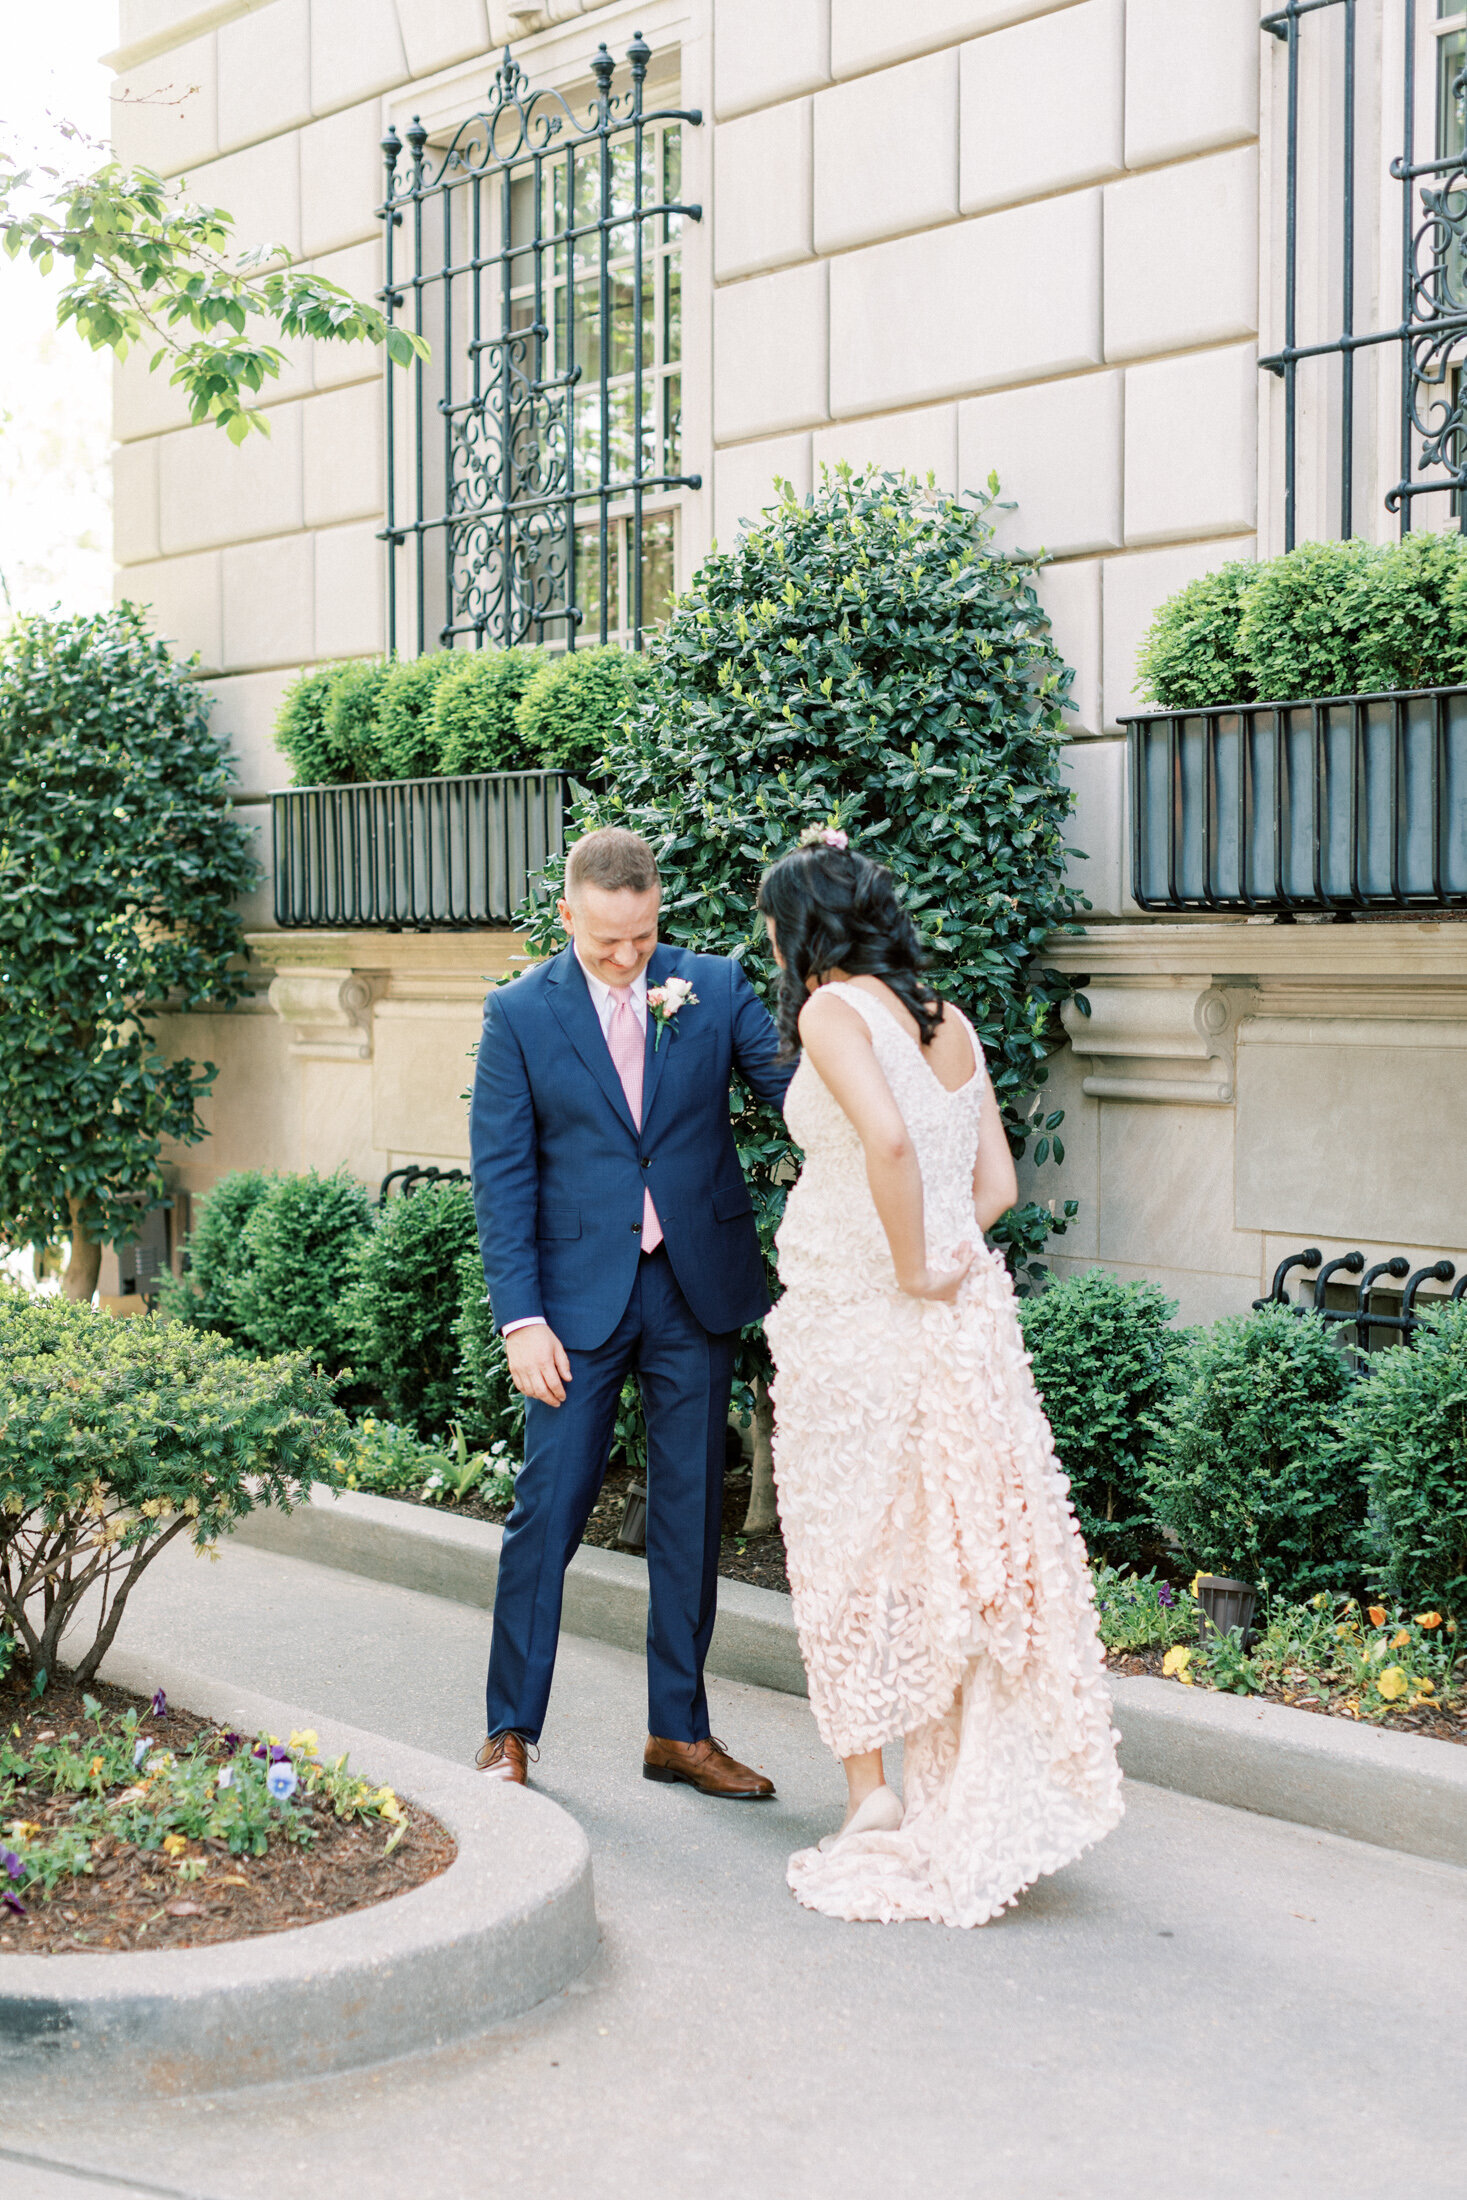 First look with a newly wed couple at the Hay-Adams hotel wedding venue